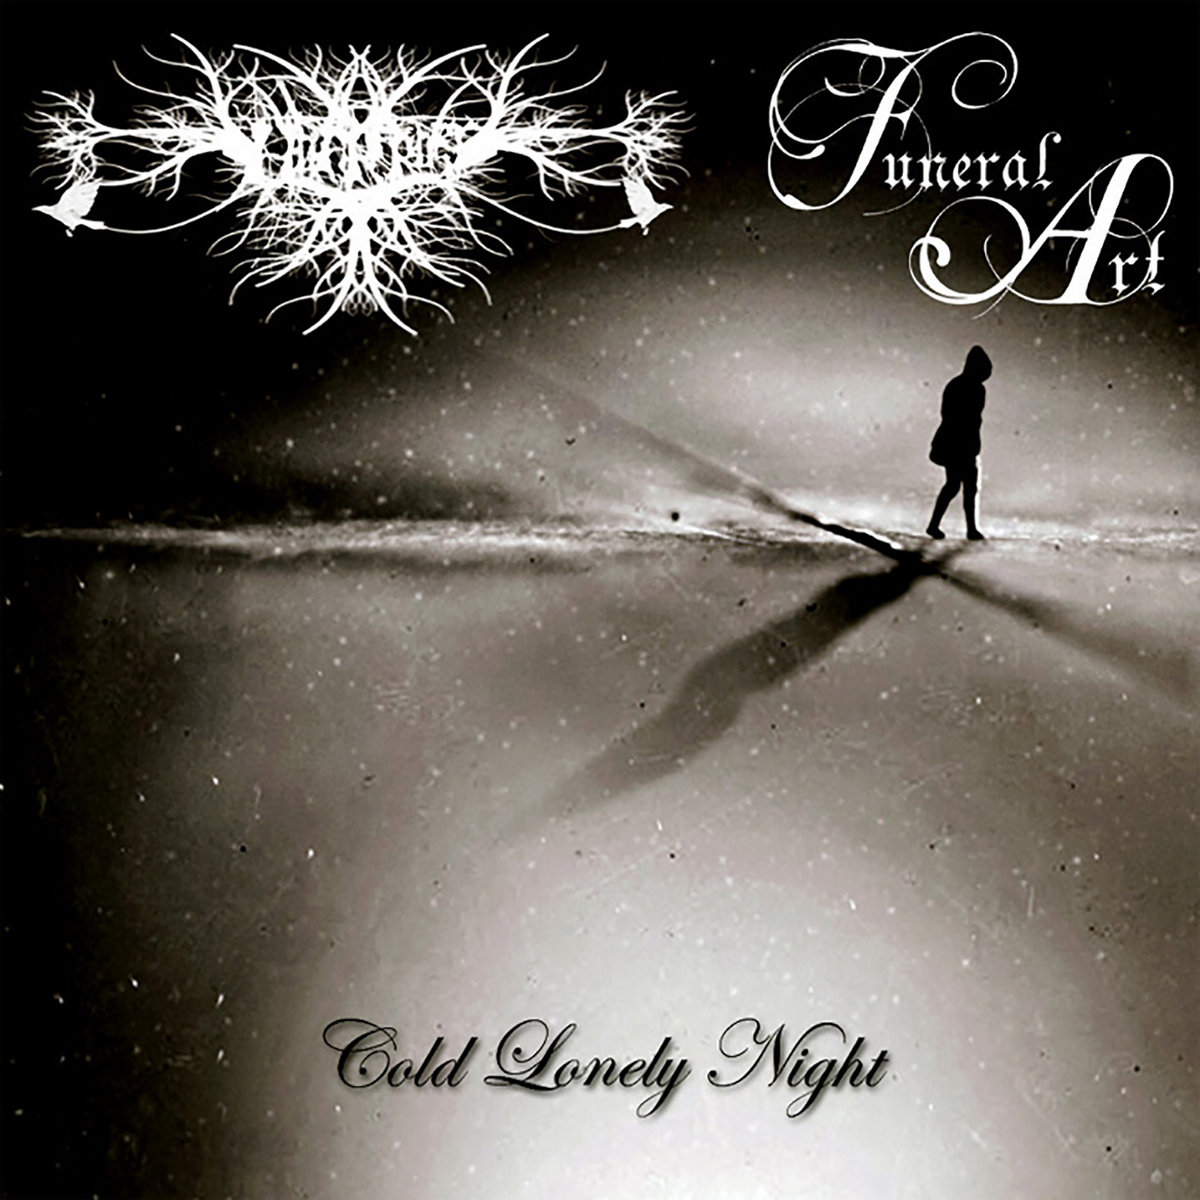 Cold Loneliness. Lonely Night. Funeral Night. Funeral Art. Cold nights 2